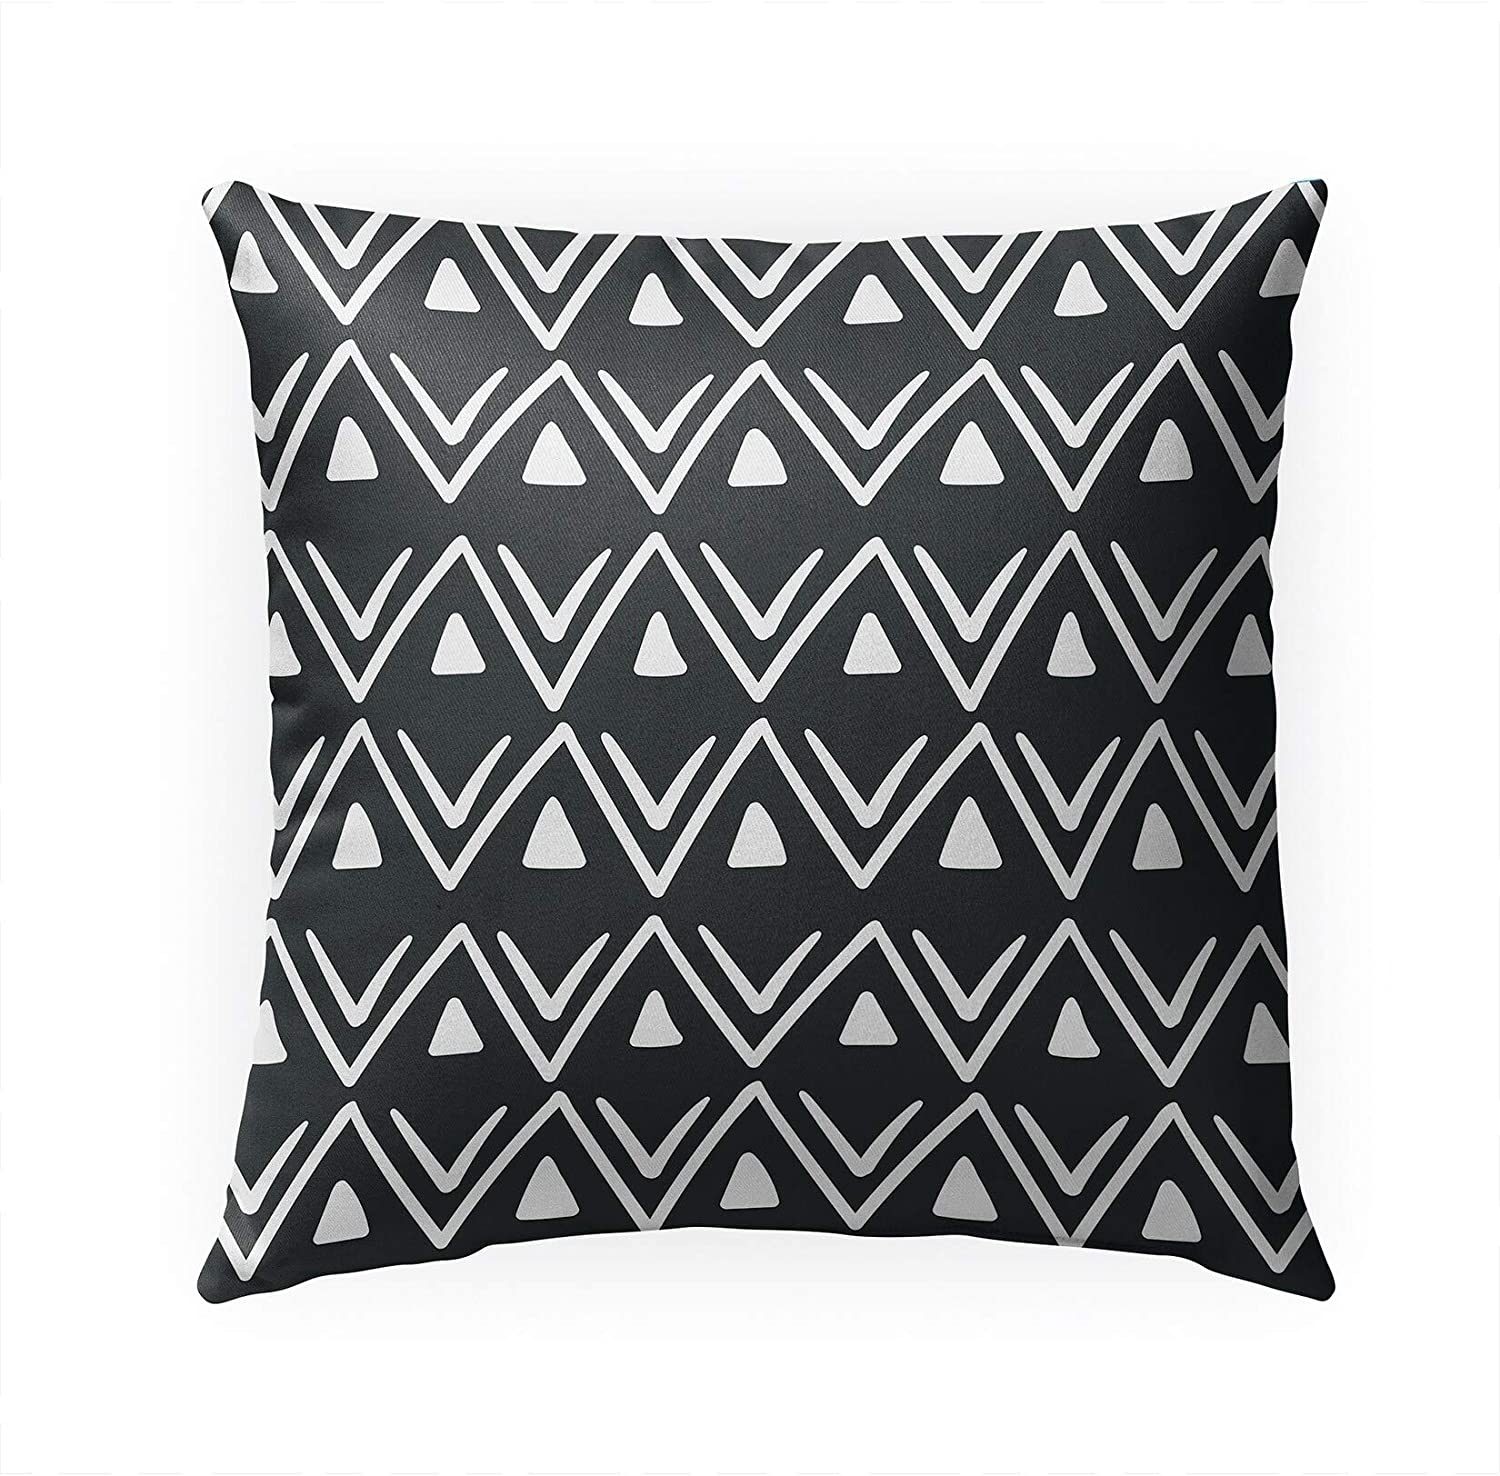 MISC Etched Zig Zag Black Indoor|Outdoor Pillow by 18x18 Black Geometric Southwestern Polyester Removable Cover